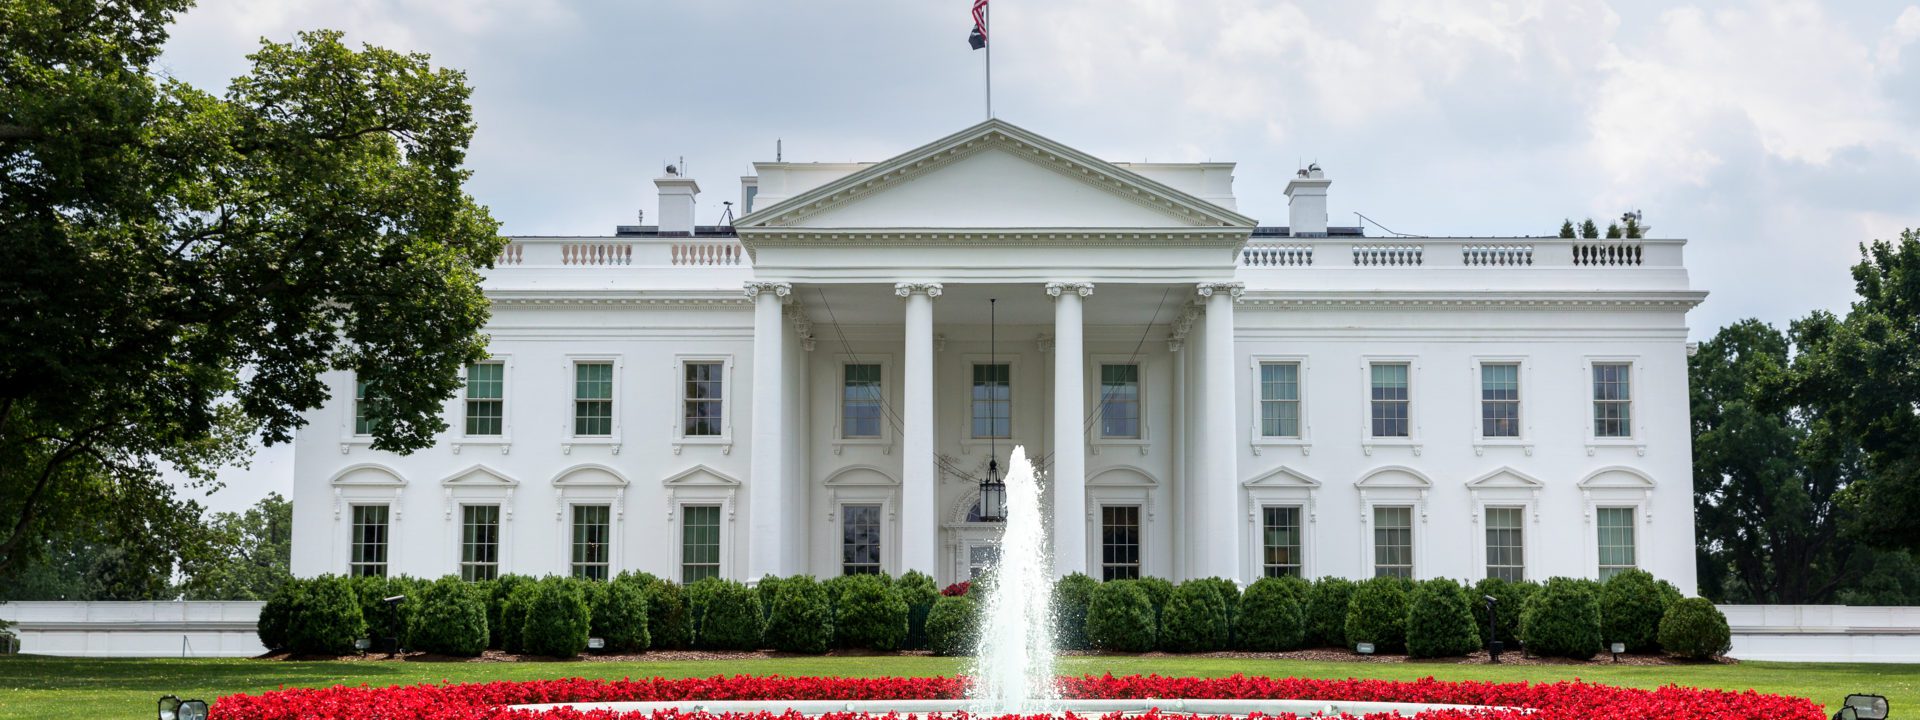 Kirkland & Ellis Partner and Gymnastics Enthusiast Joins White House Counsel’s Office